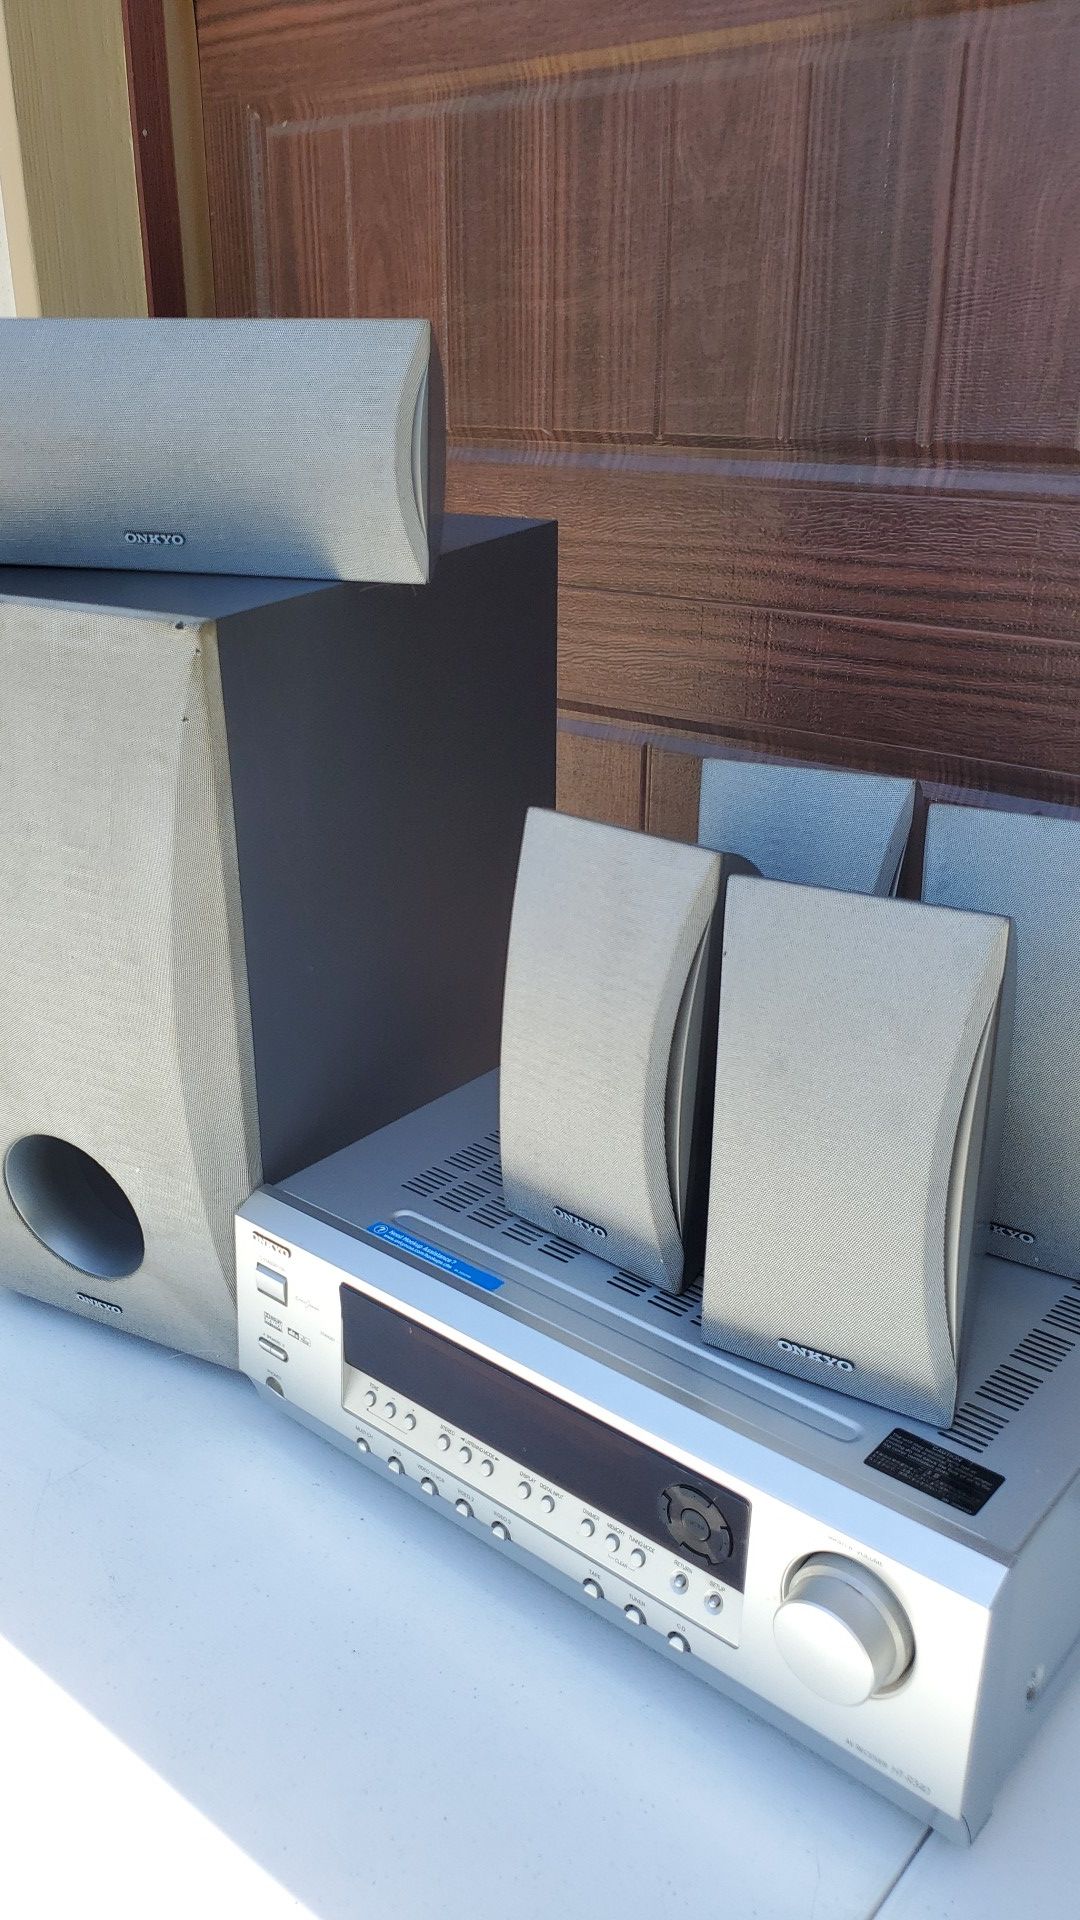 Onkyo HT-R340 reciever home theater with 6 speakers